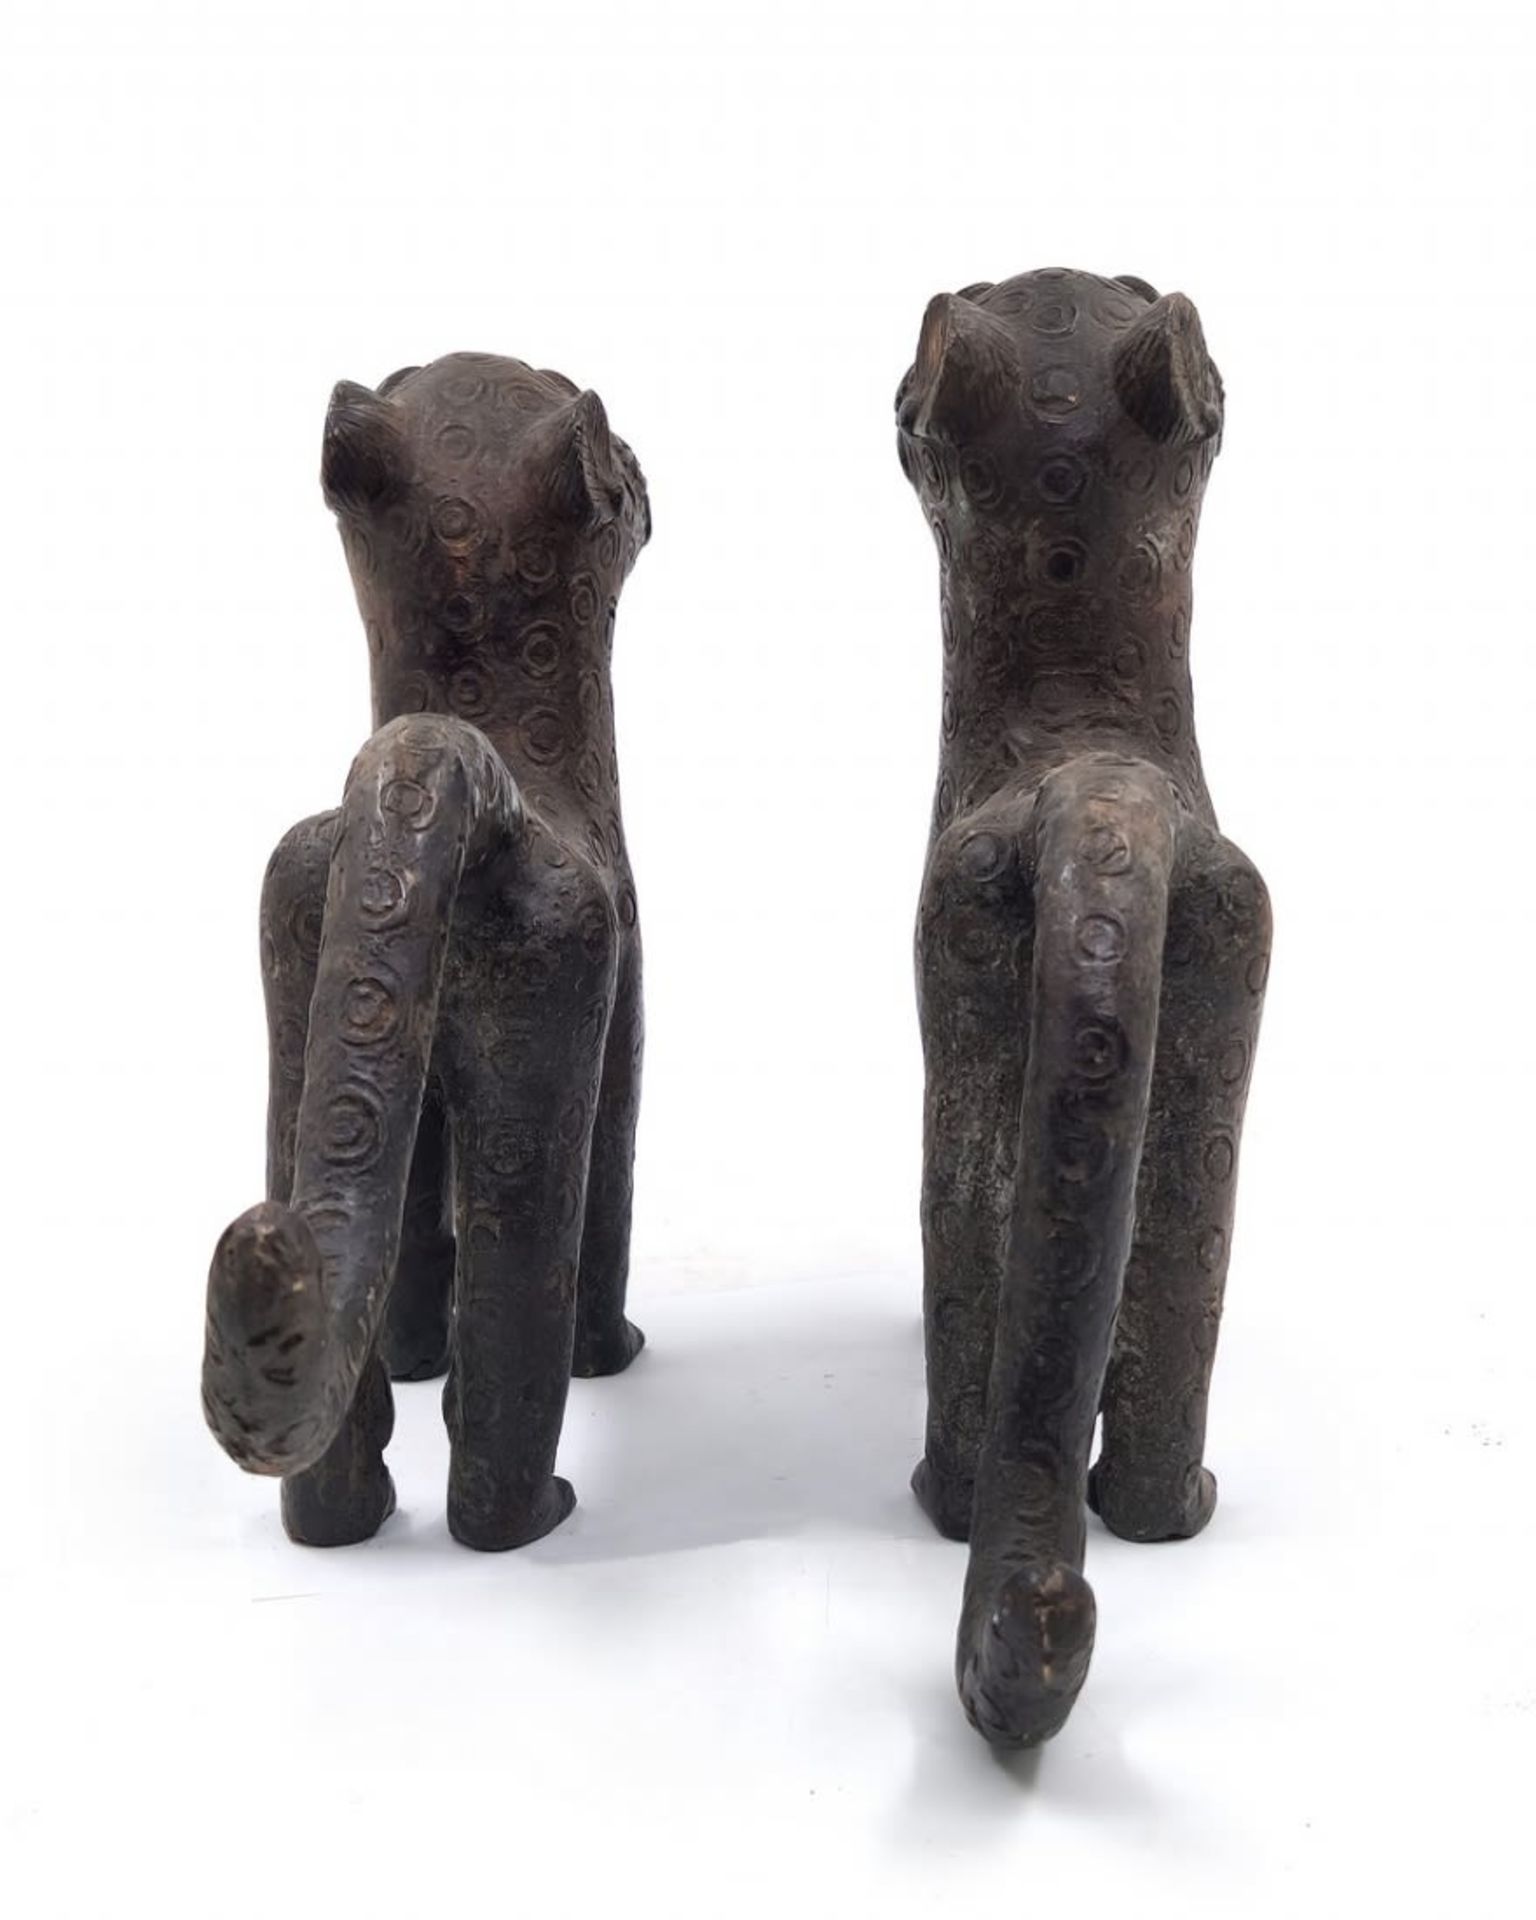 A pair of antique African statues, around hundred years old, in the form of panthers, made in ' - Image 3 of 8